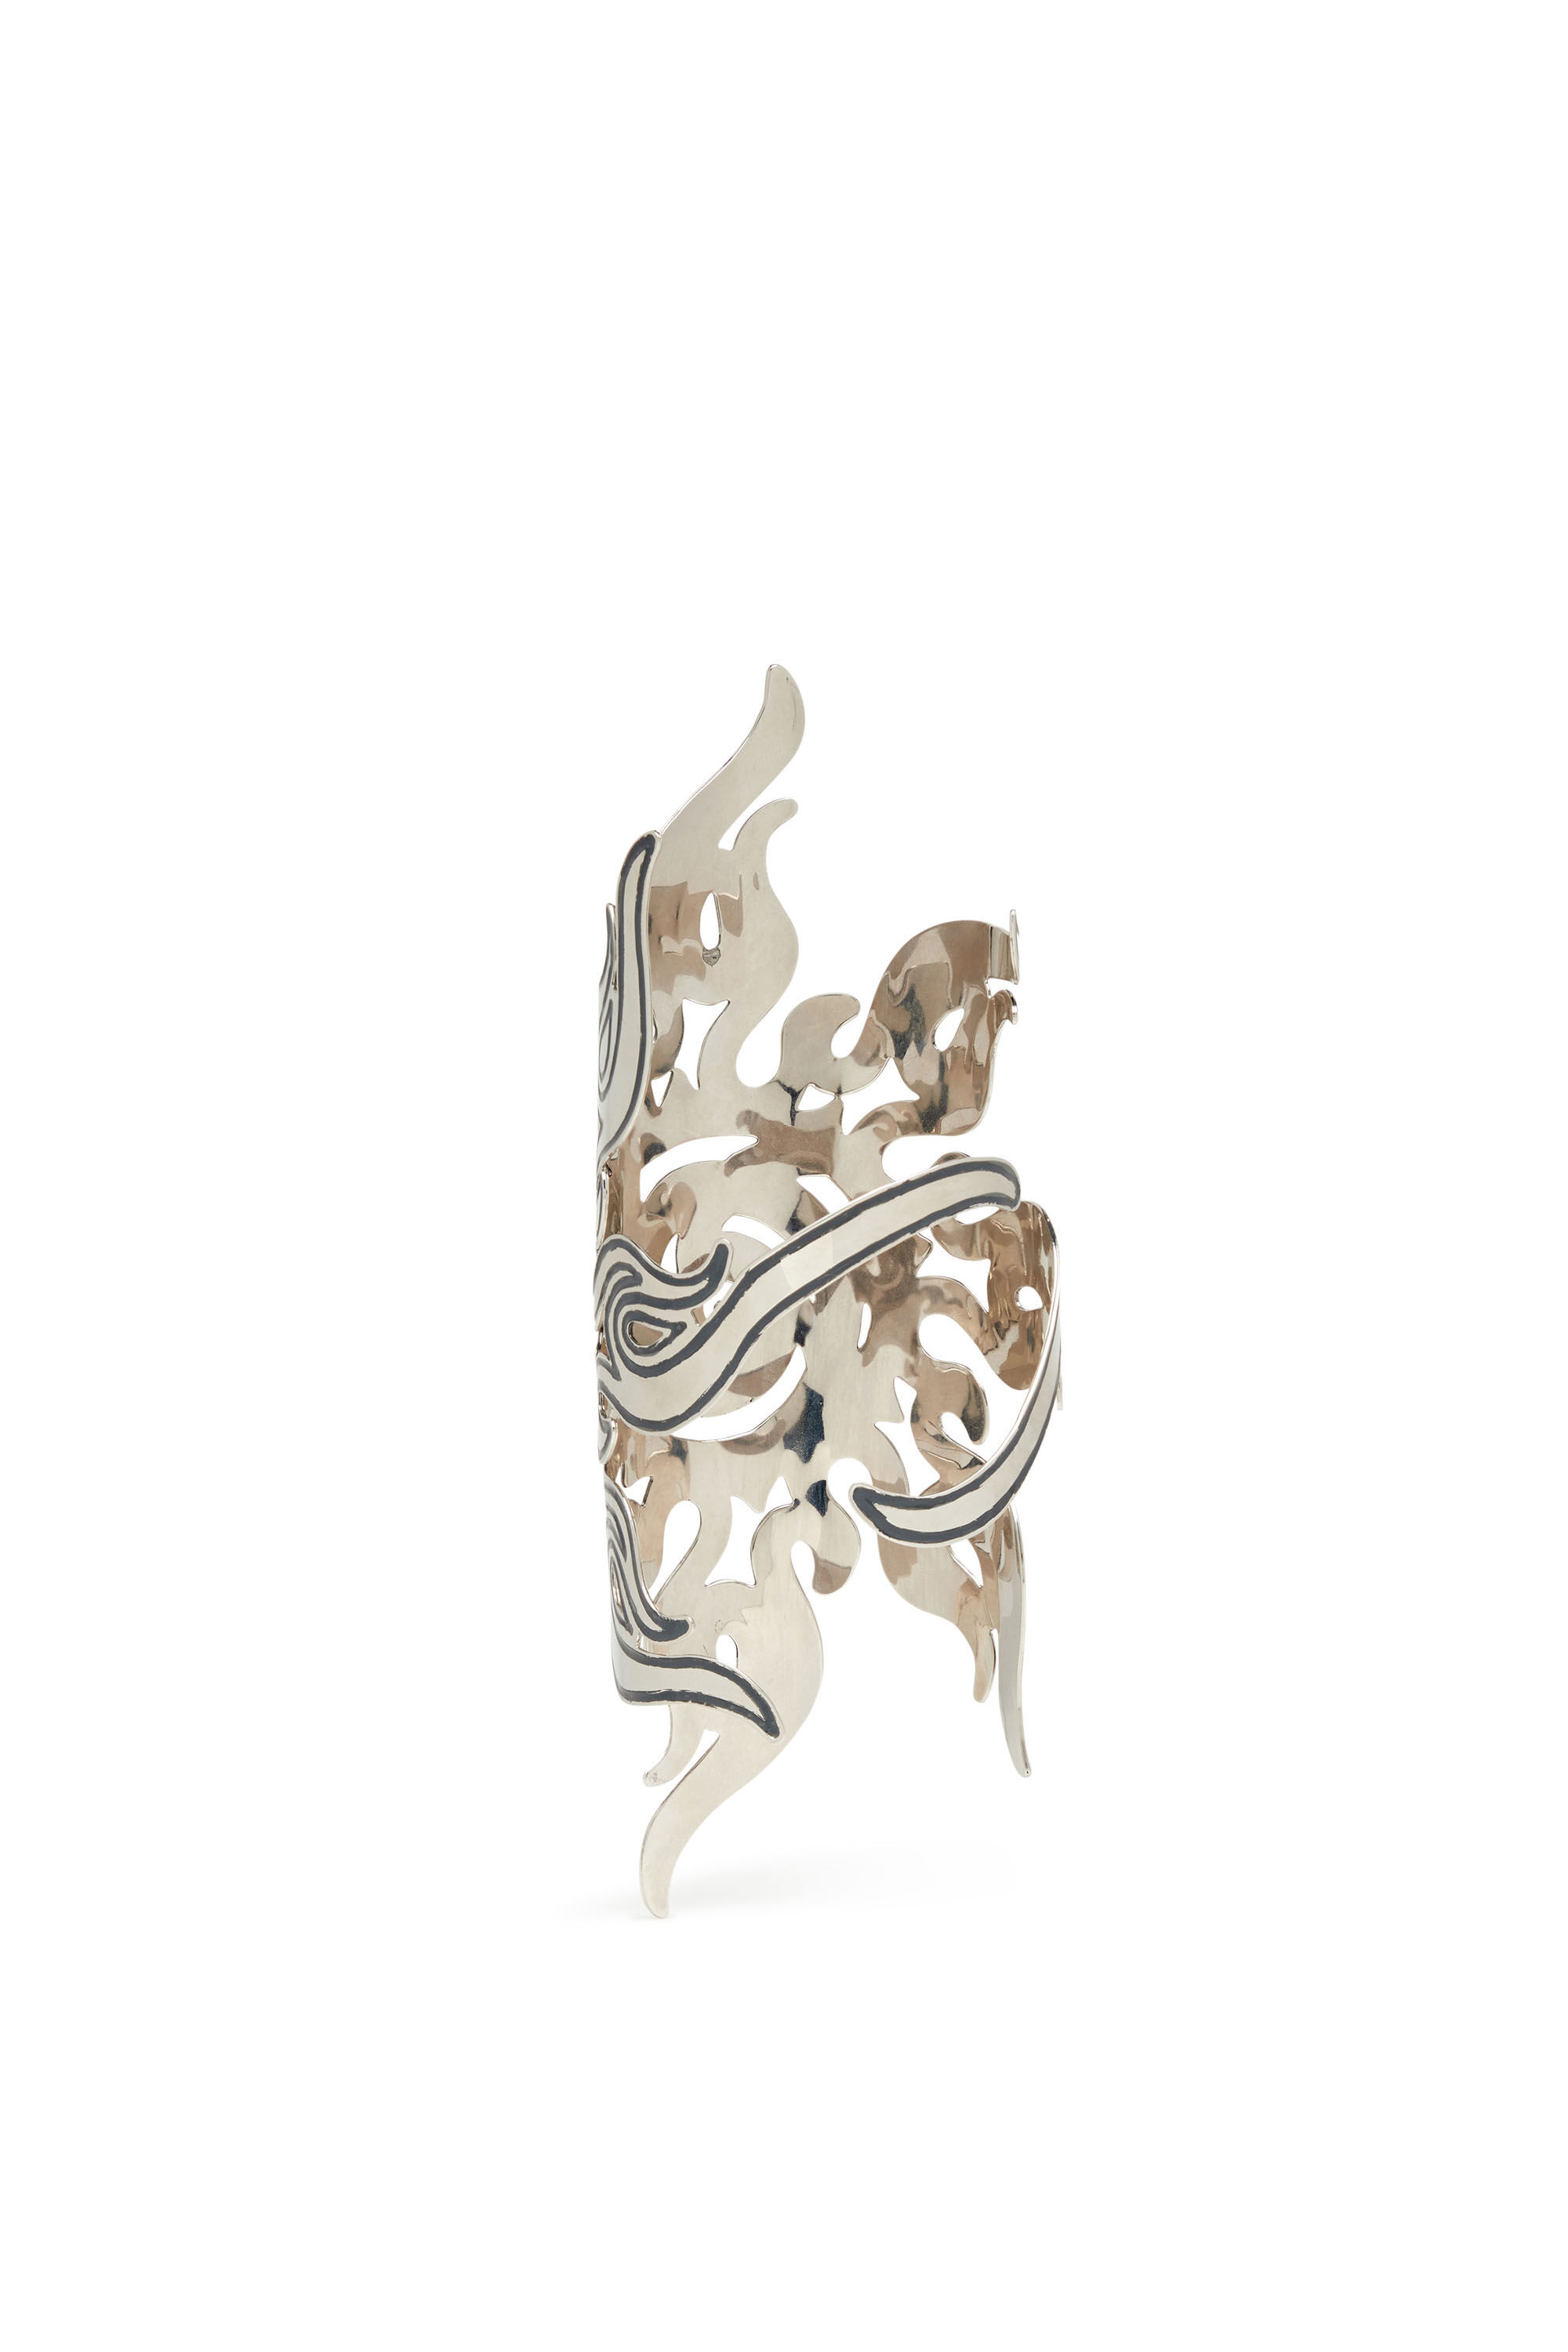 Diesel - TRIBAL SUN ARMBAND, Donna Arm cuff motivo sole tribale in Argento - Image 2